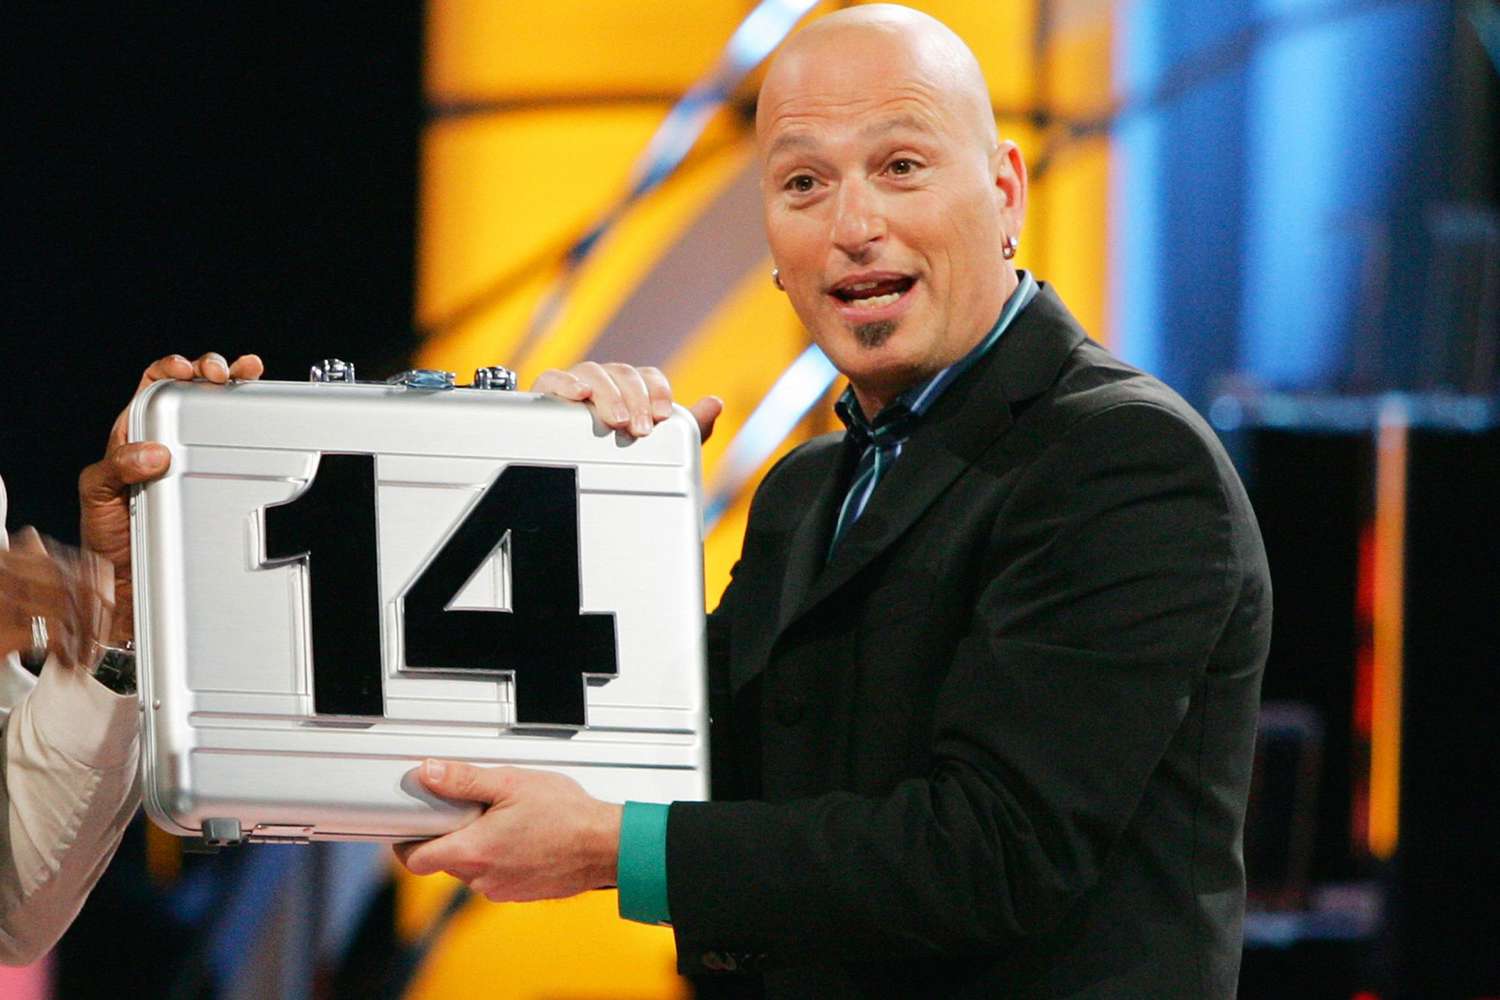 Pictured: (l-r) Contestant, Host Howie Mandel